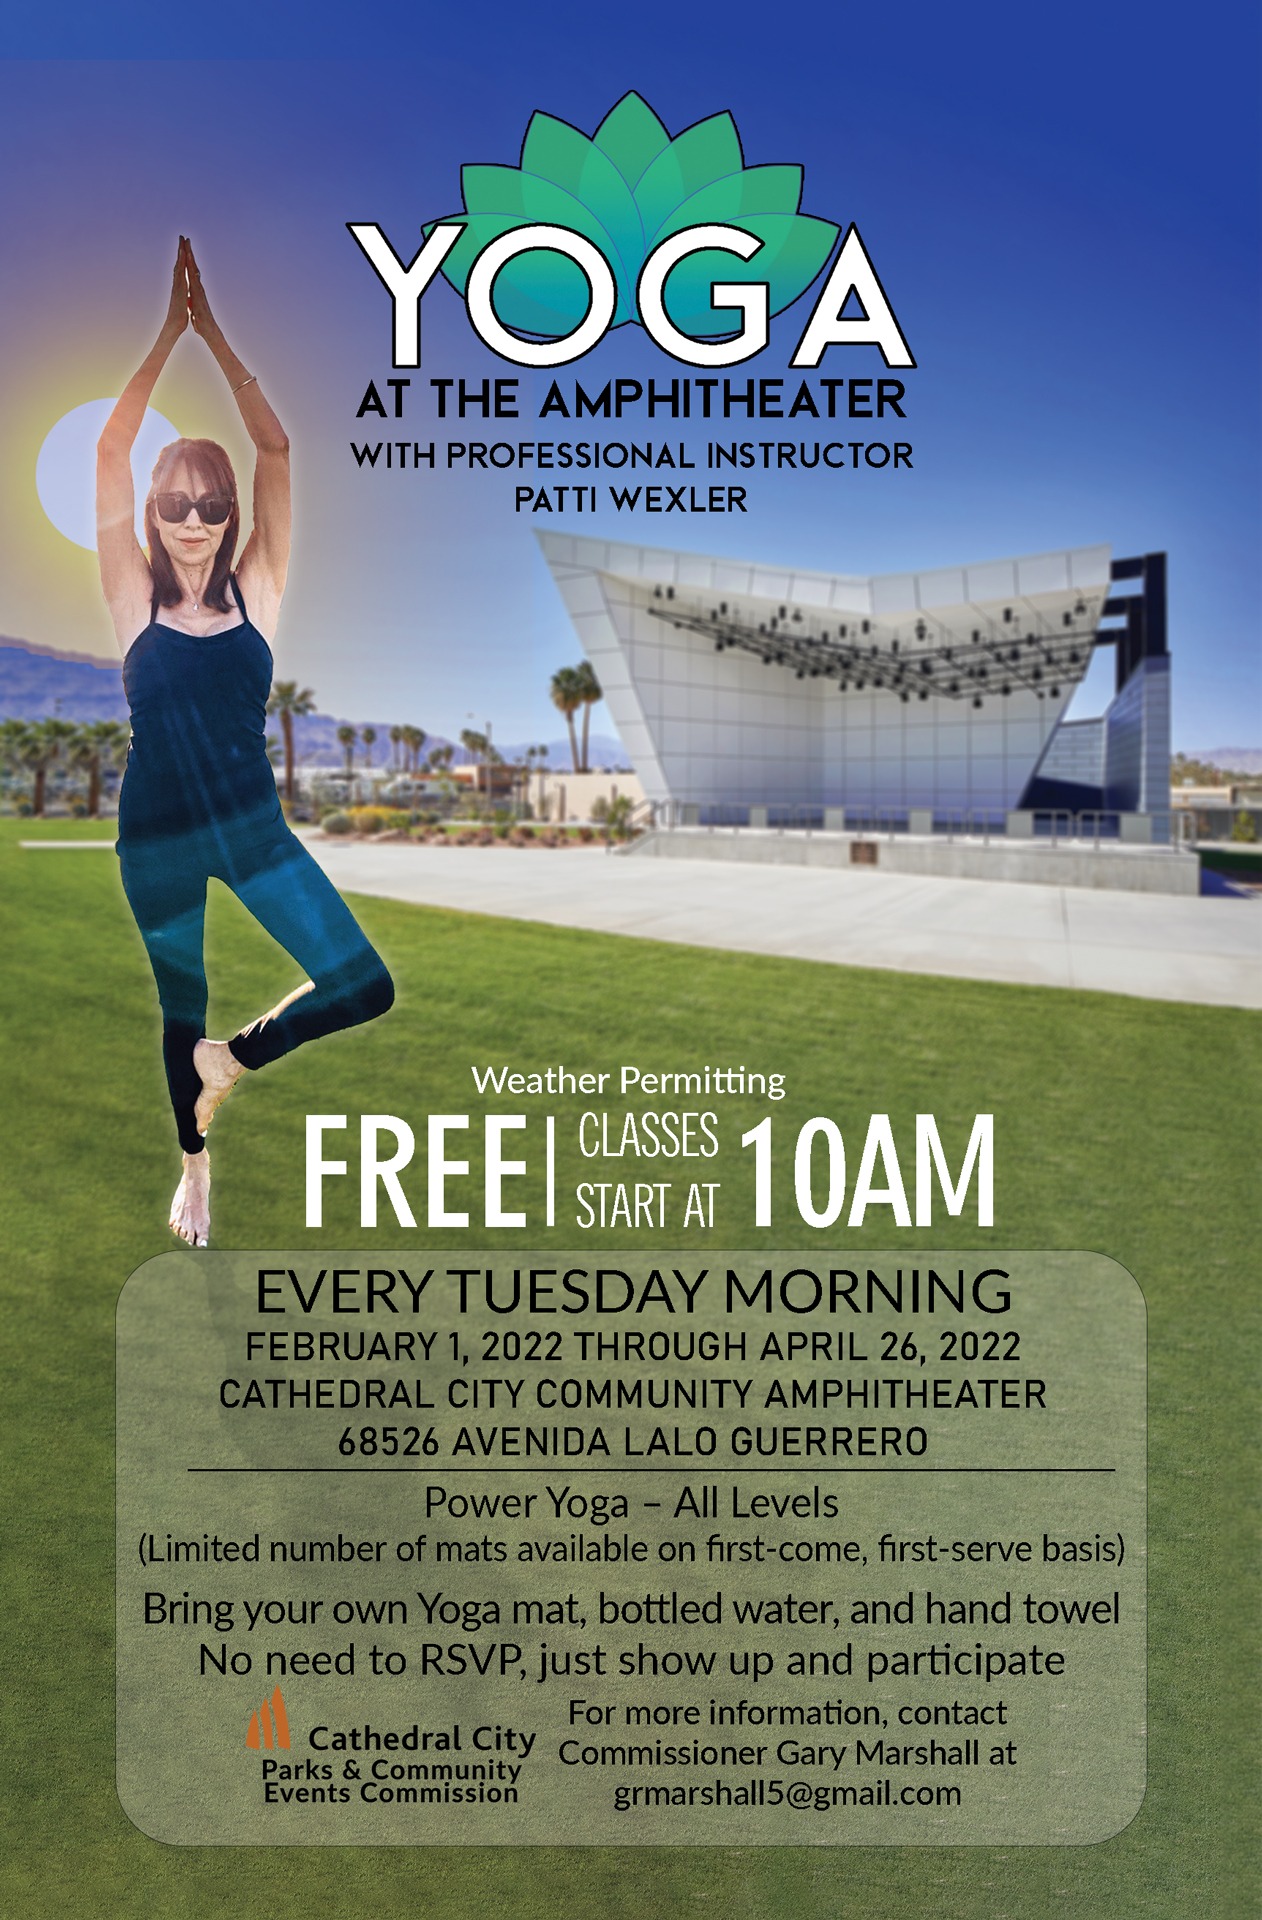 Free Yoga Classes Begin Tuesday at the Cathedral City Community Amphitheater